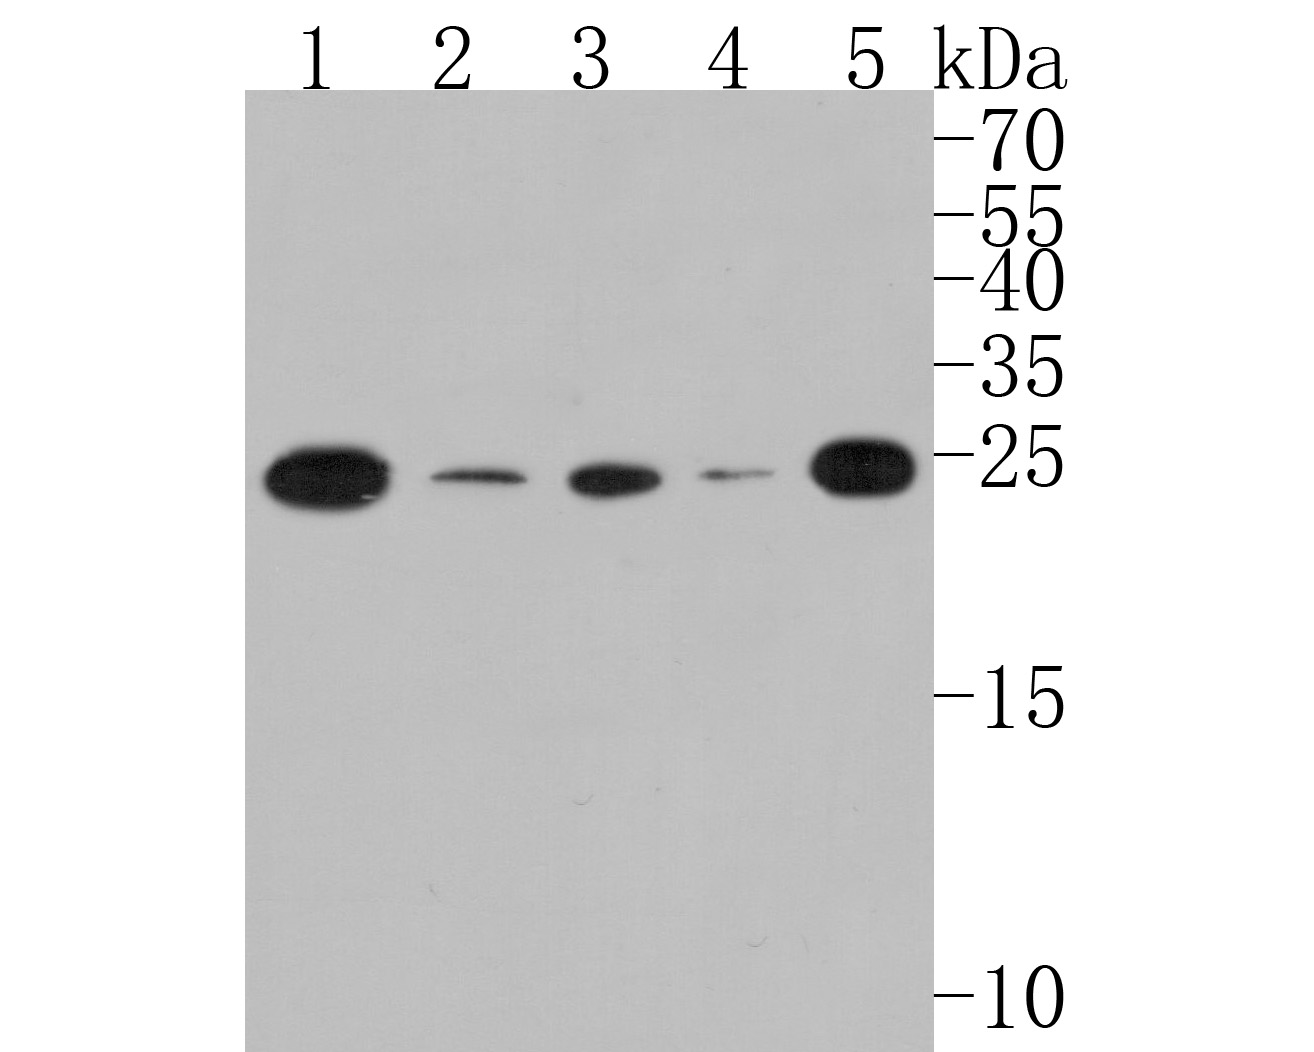 Western blot analysis of TCF21 on different lysates. Proteins were transferred to a PVDF membrane and blocked with 5% BSA in PBS for 1 hour at room temperature. The primary antibody (HA500114, 1/1,000) was used in 5% BSA at room temperature for 2 hours. Goat Anti-Rabbit IgG - HRP Secondary Antibody (HA1001) at 1:200,000 dilution was used for 1 hour at room temperature.<br />
Positive control: <br />
Lane 1: 293T cell lysate<br />
Lane 2: K562 cell lysate<br />
Lane 3: Hela cell lysate<br />
Lane 4: Human lung tissue lysate<br />
Lane 5: Mouse kidney tissue lysate